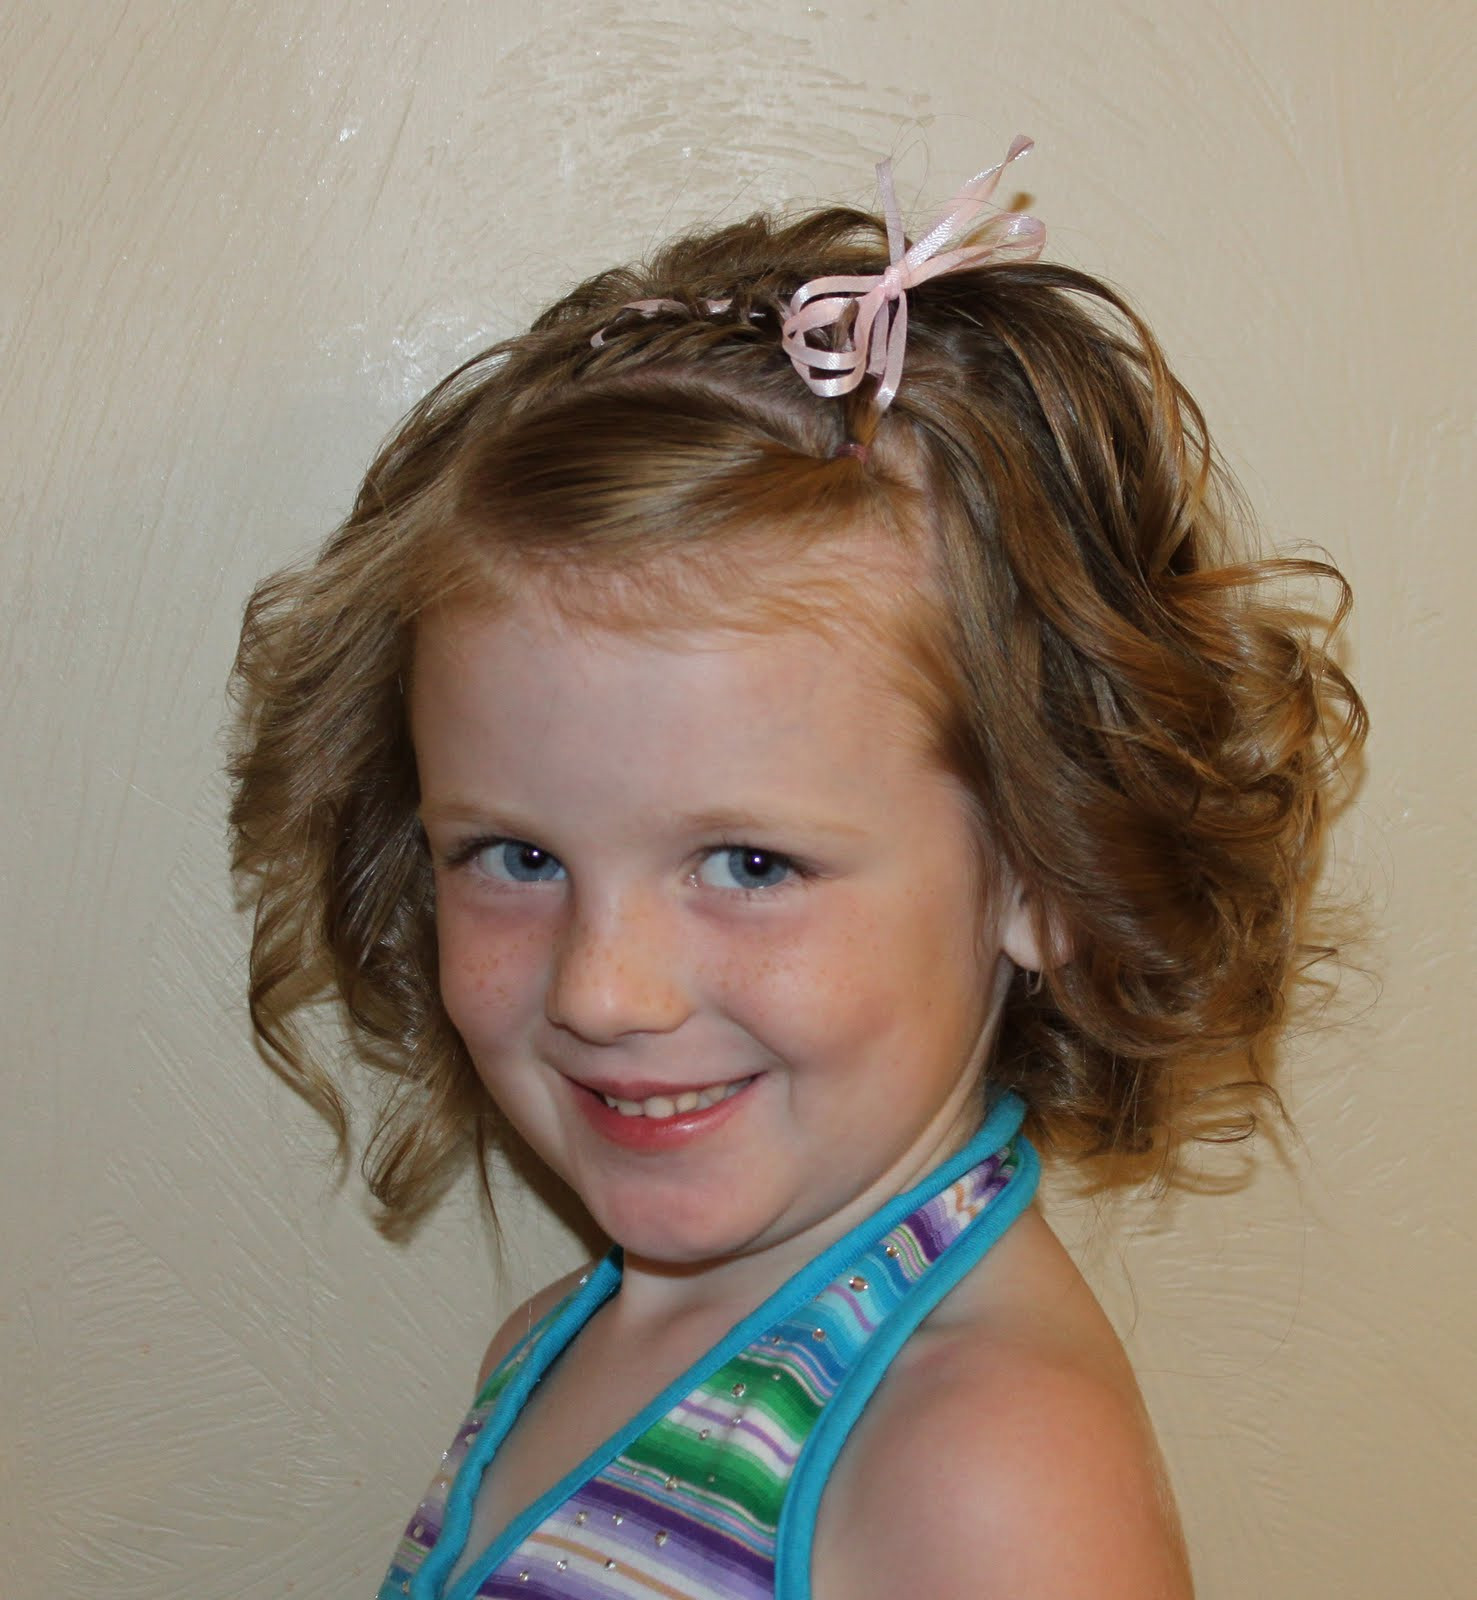 Toddler Hairstyles Girls
 Hairstyles for Girls The Wright Hair Toddler Braids and